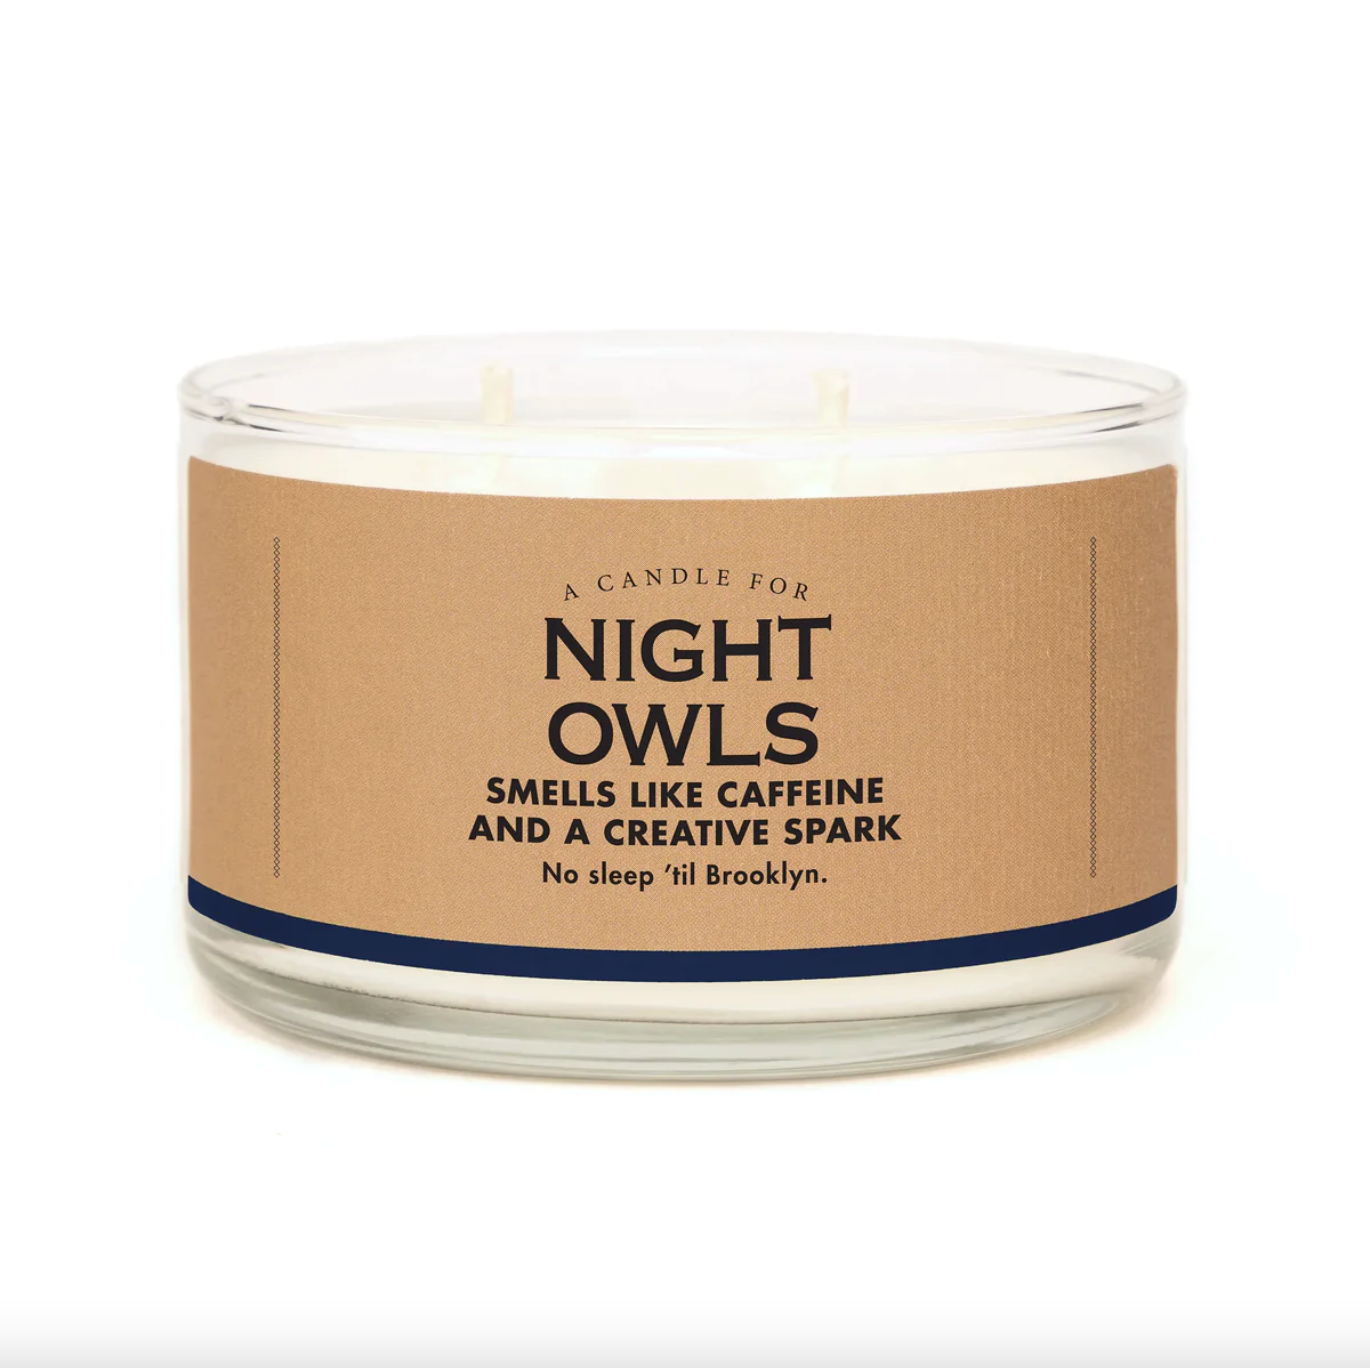 A Candle for Night Owls - Heart of the Home LV